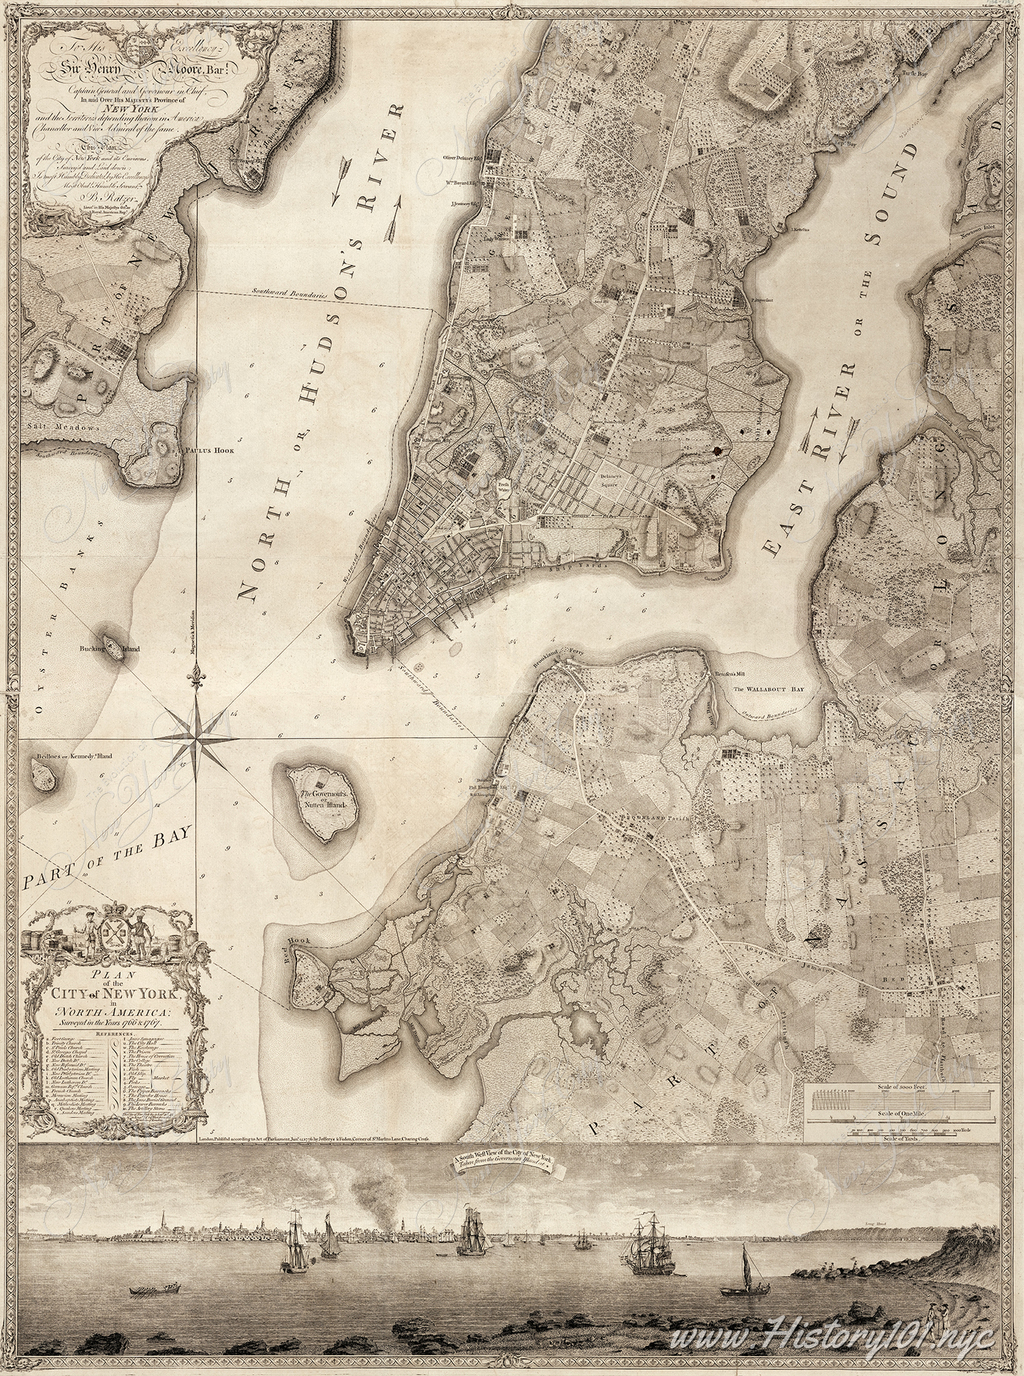 Explore the 1766-1767 "Plan of the city of New York" by Bernard Ratzer, a detailed map capturing New York City's landscape before the American Revolution